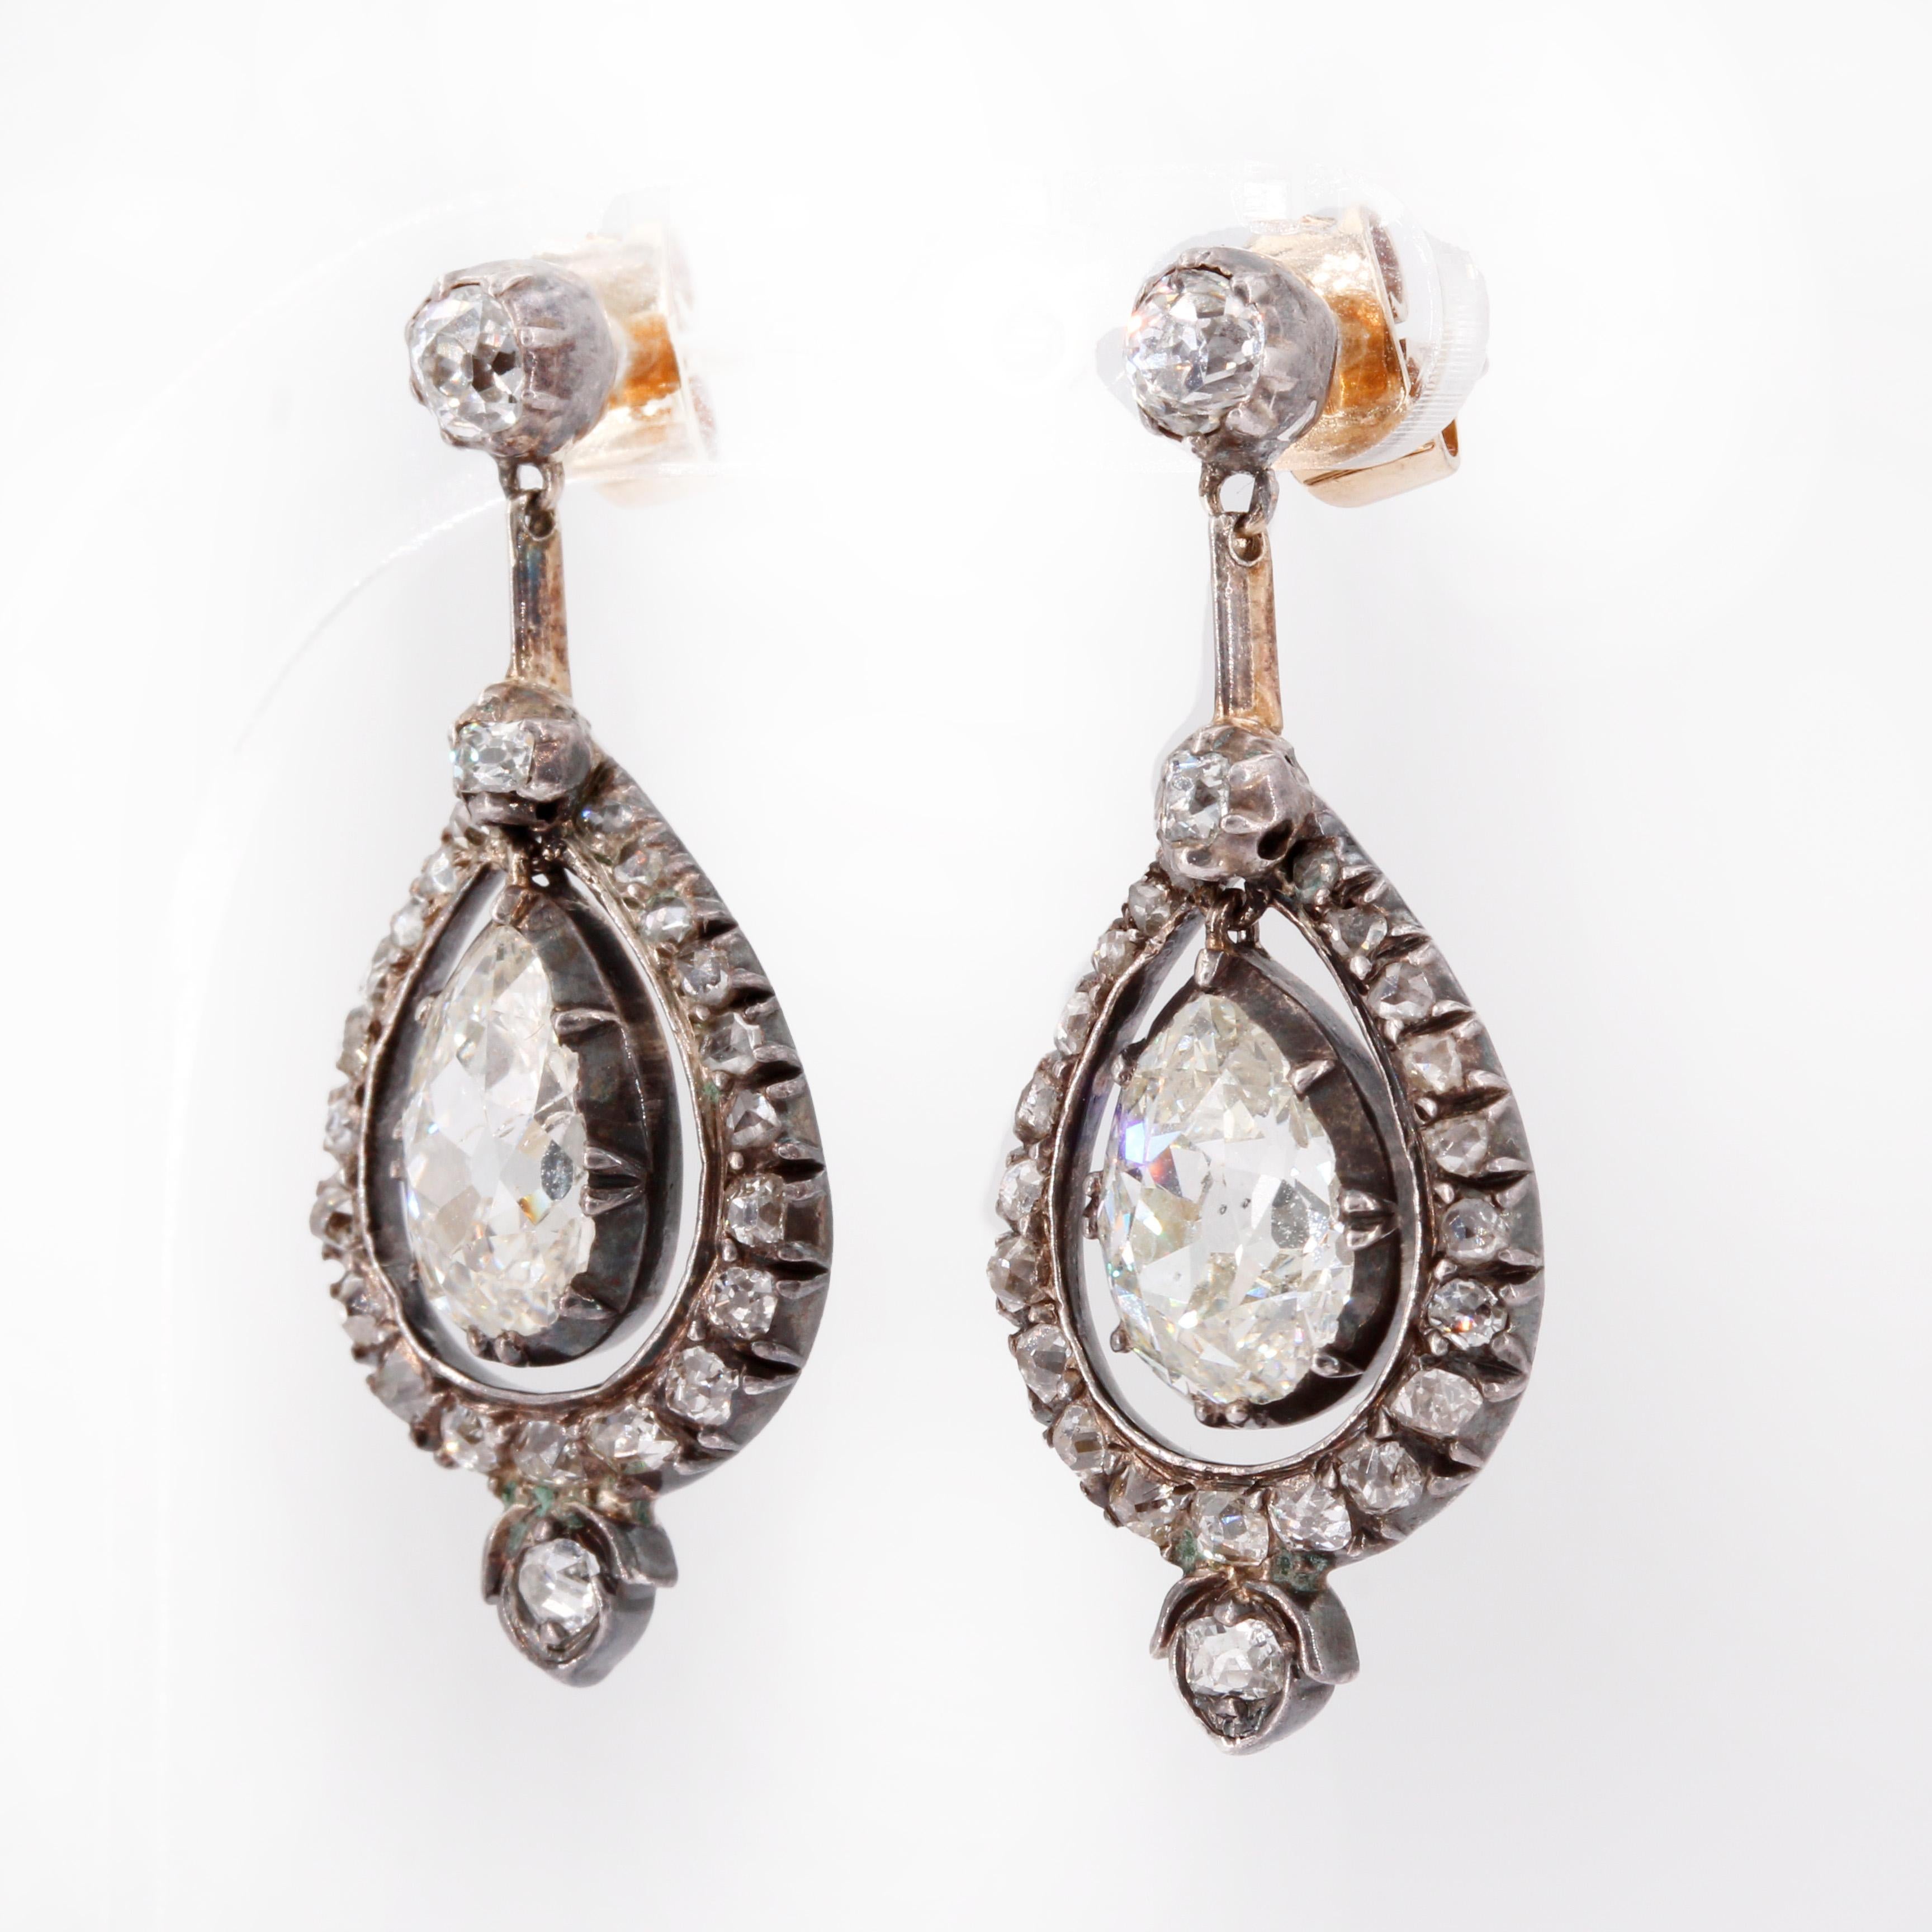 Antique white gold and diamond earrings. 
Approx. 1ct. old cut diamonds and 3.1ct old pear shape diamonds